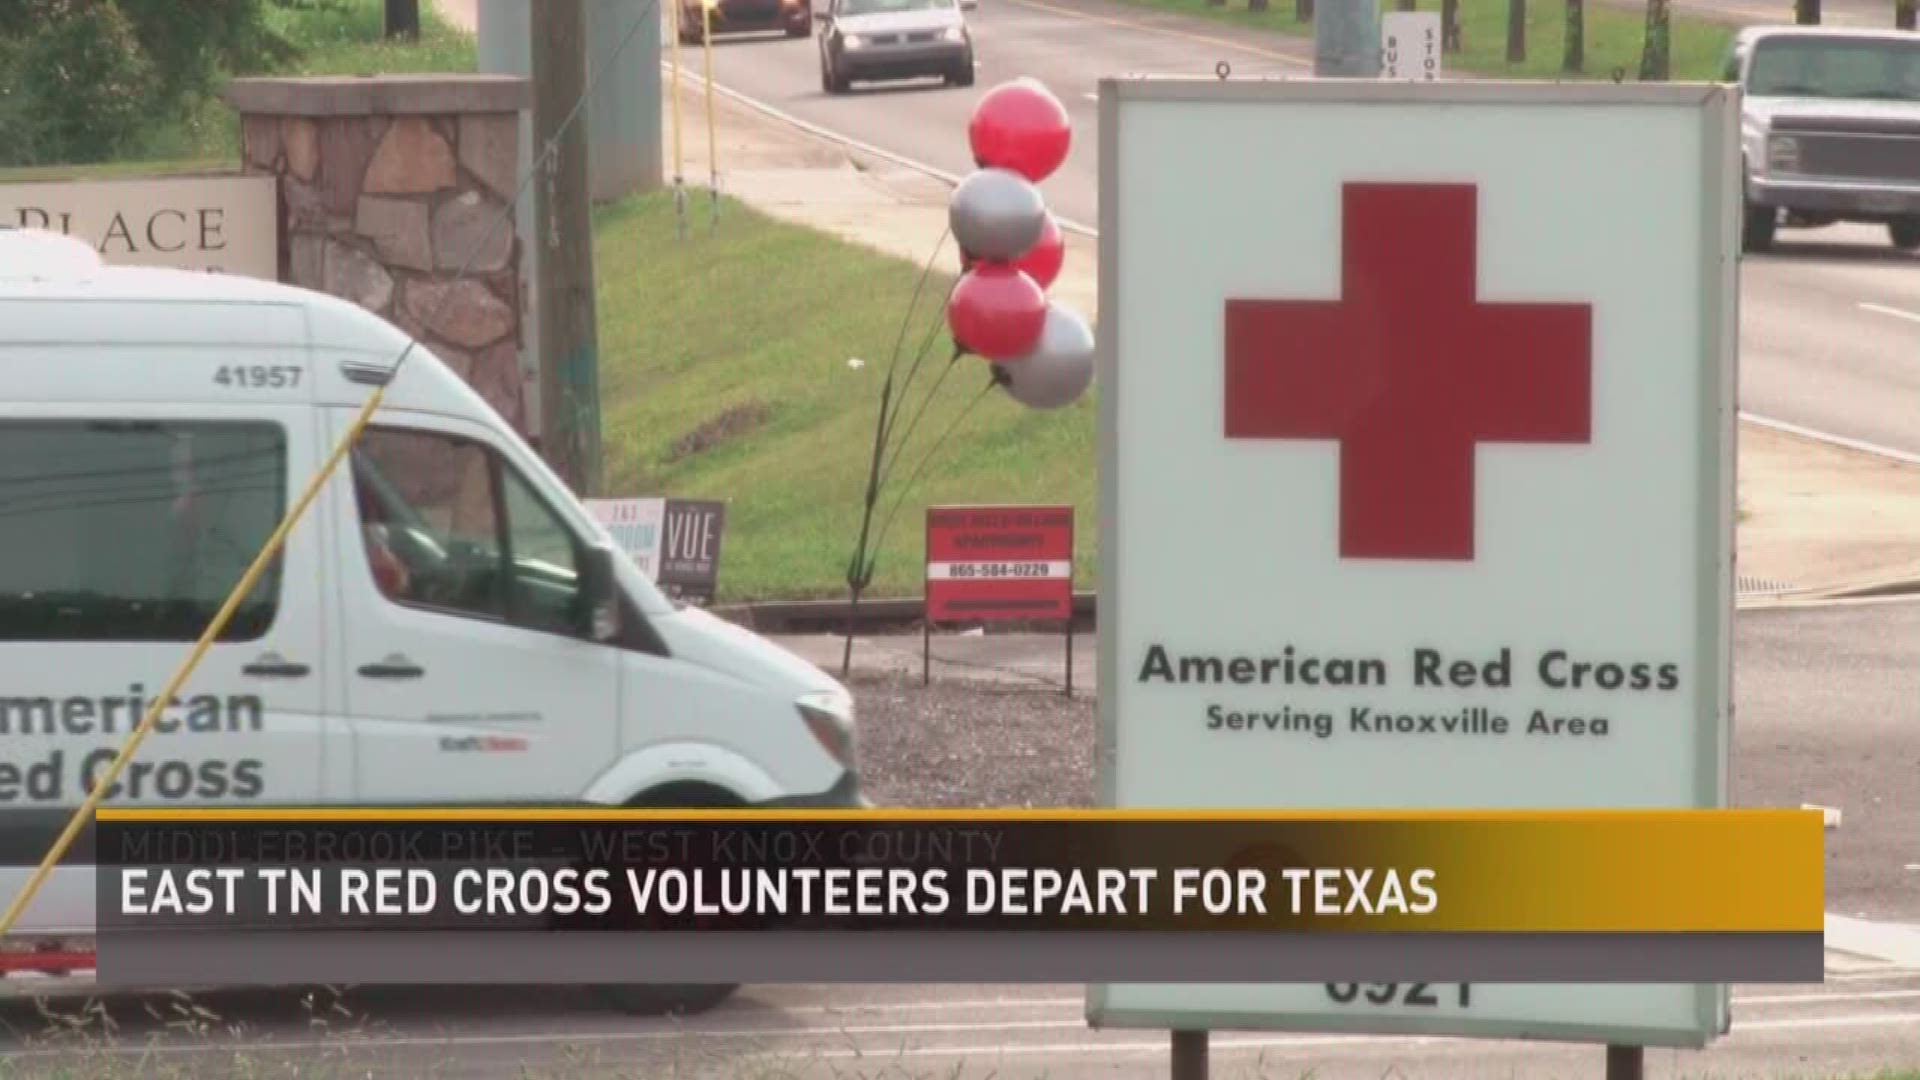 Seven ted Cross volunteers from East Tennessee are headed for Houston to help flood victims, while others are waiting for orders to deploy